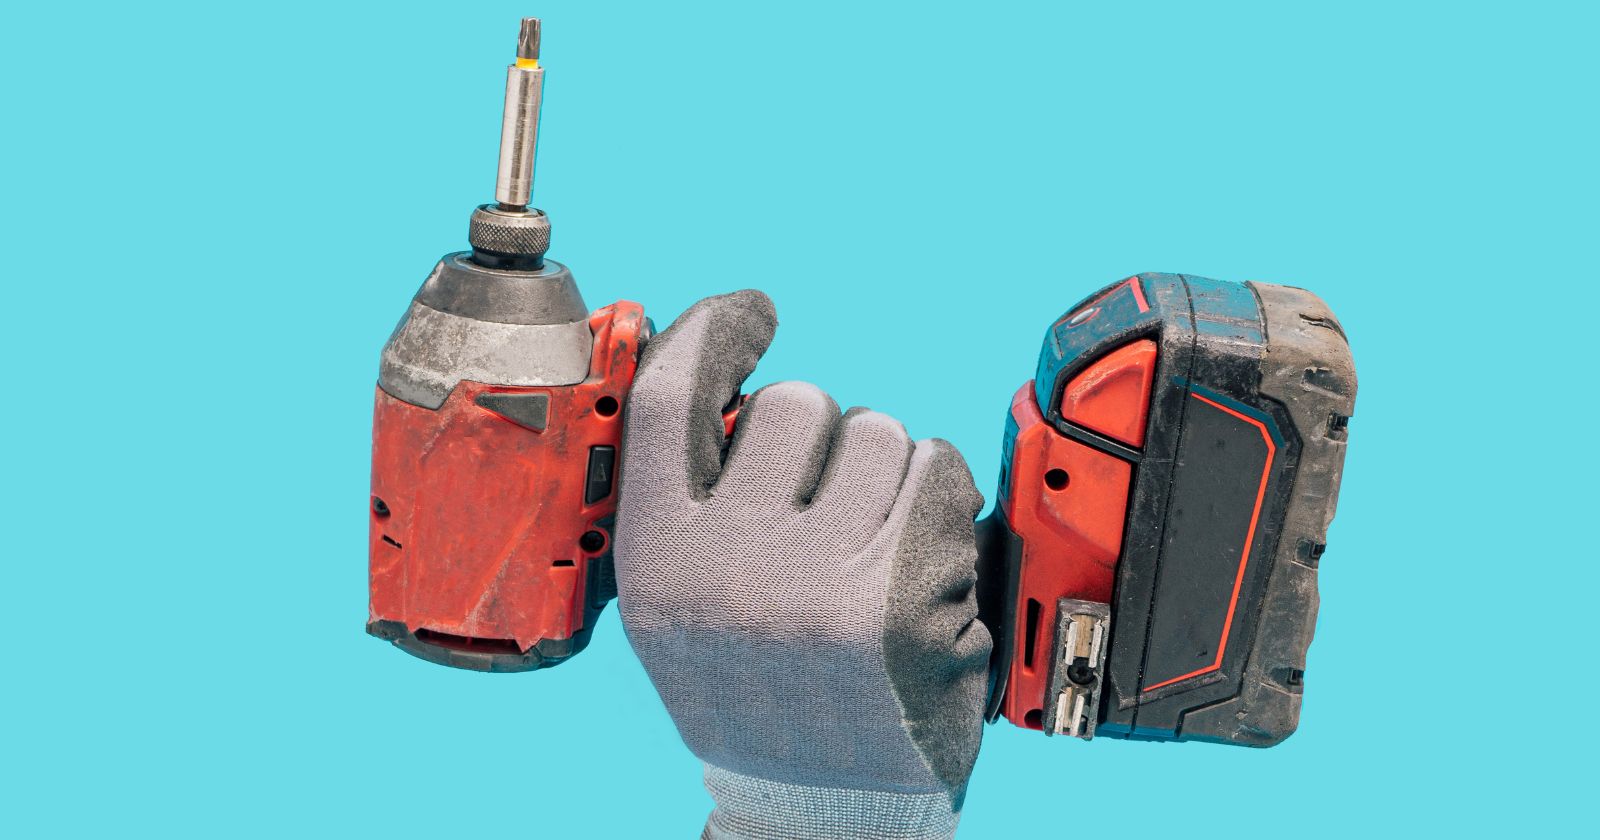 Different Types Of Impact Drivers And Their Uses